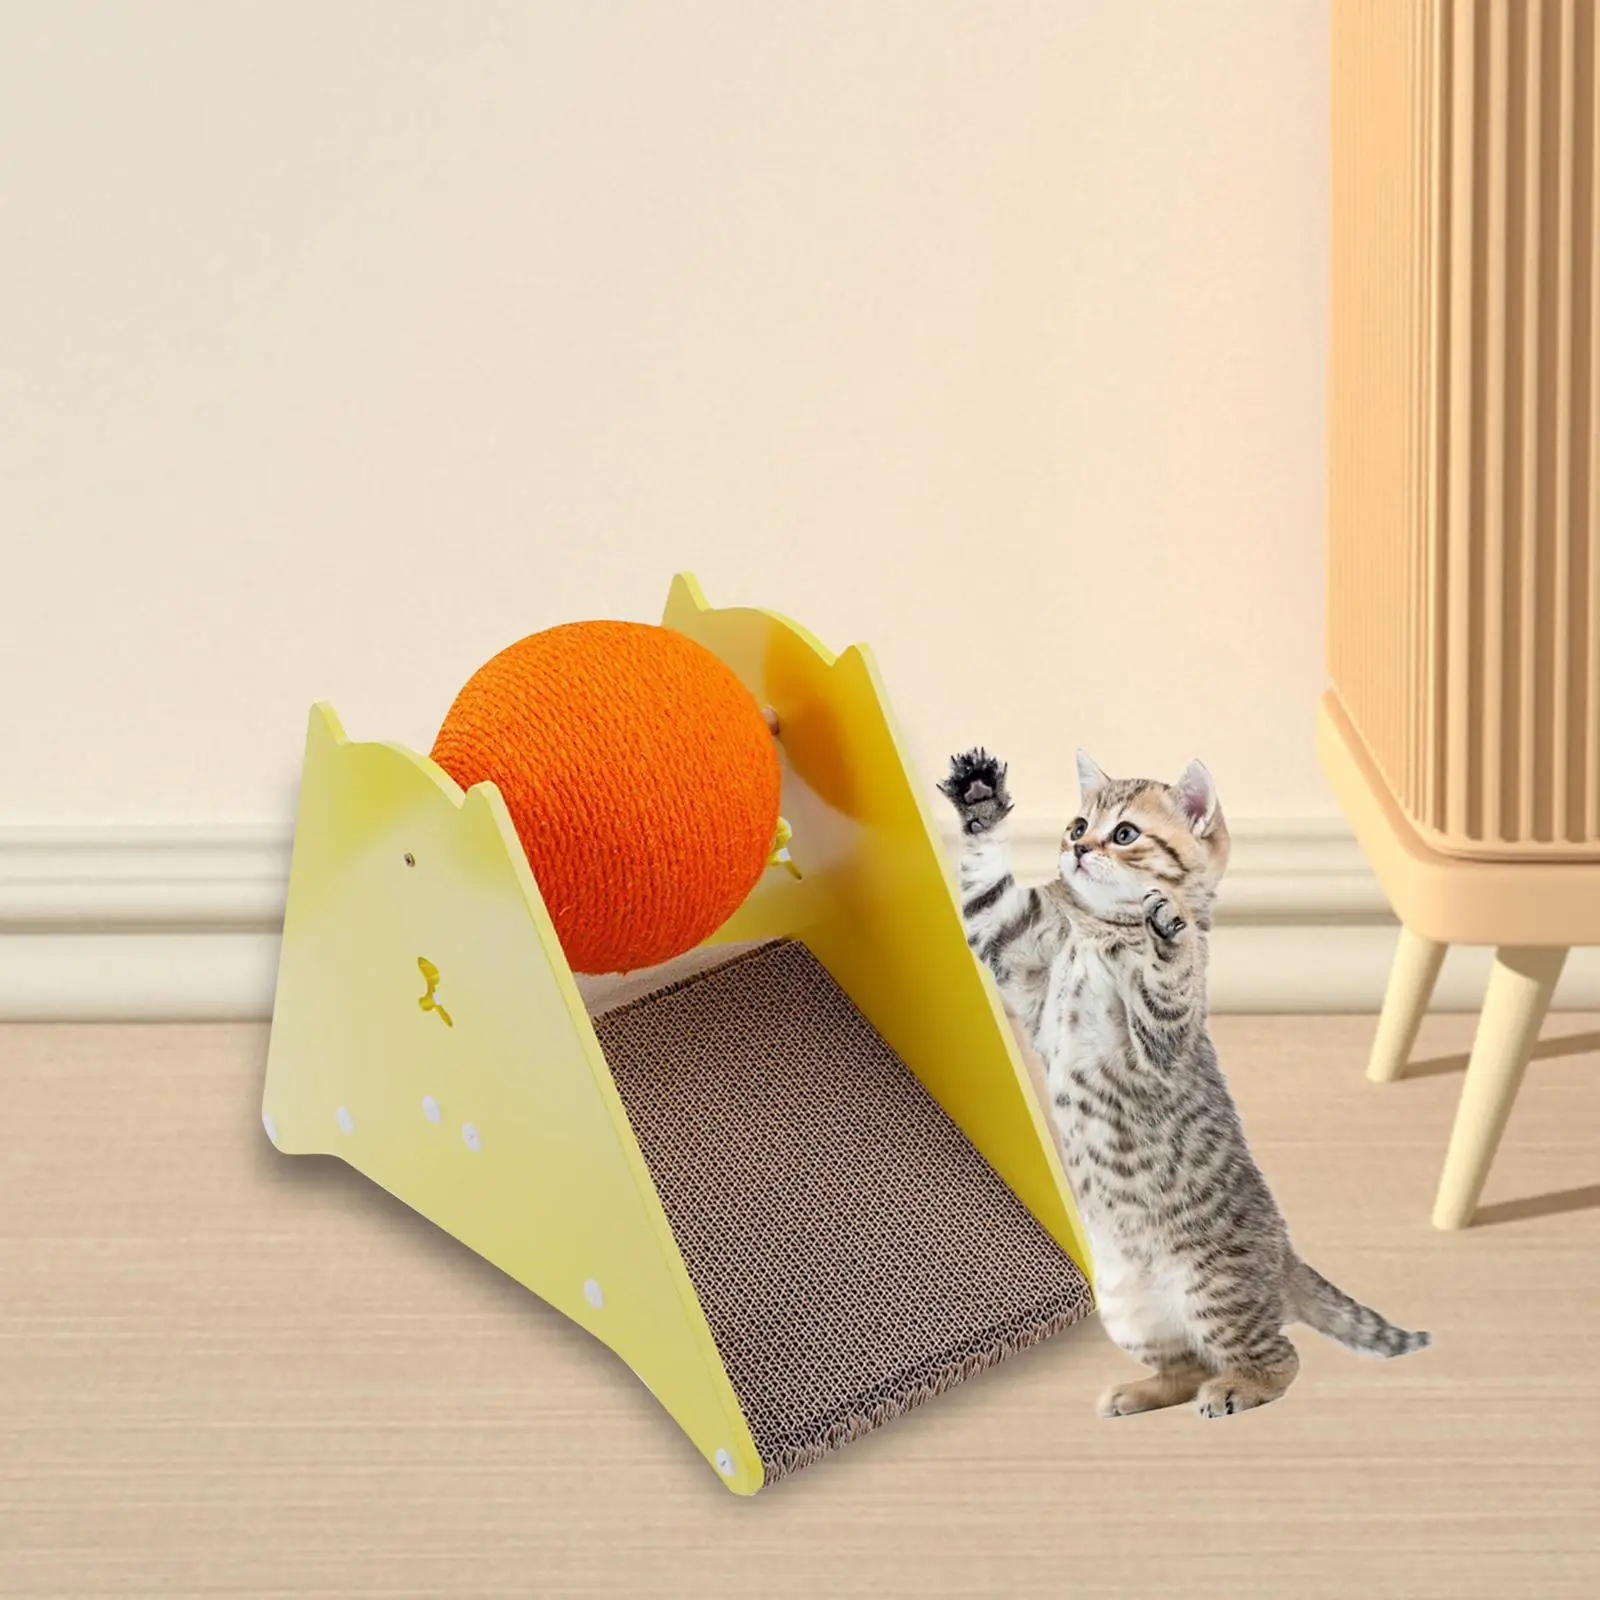 Cat Scratching Board with Ball Cardboard Play Solid Wood Stand Claw Grinding Protecting Furniture Cat Scratcher Toy Pet Supplies